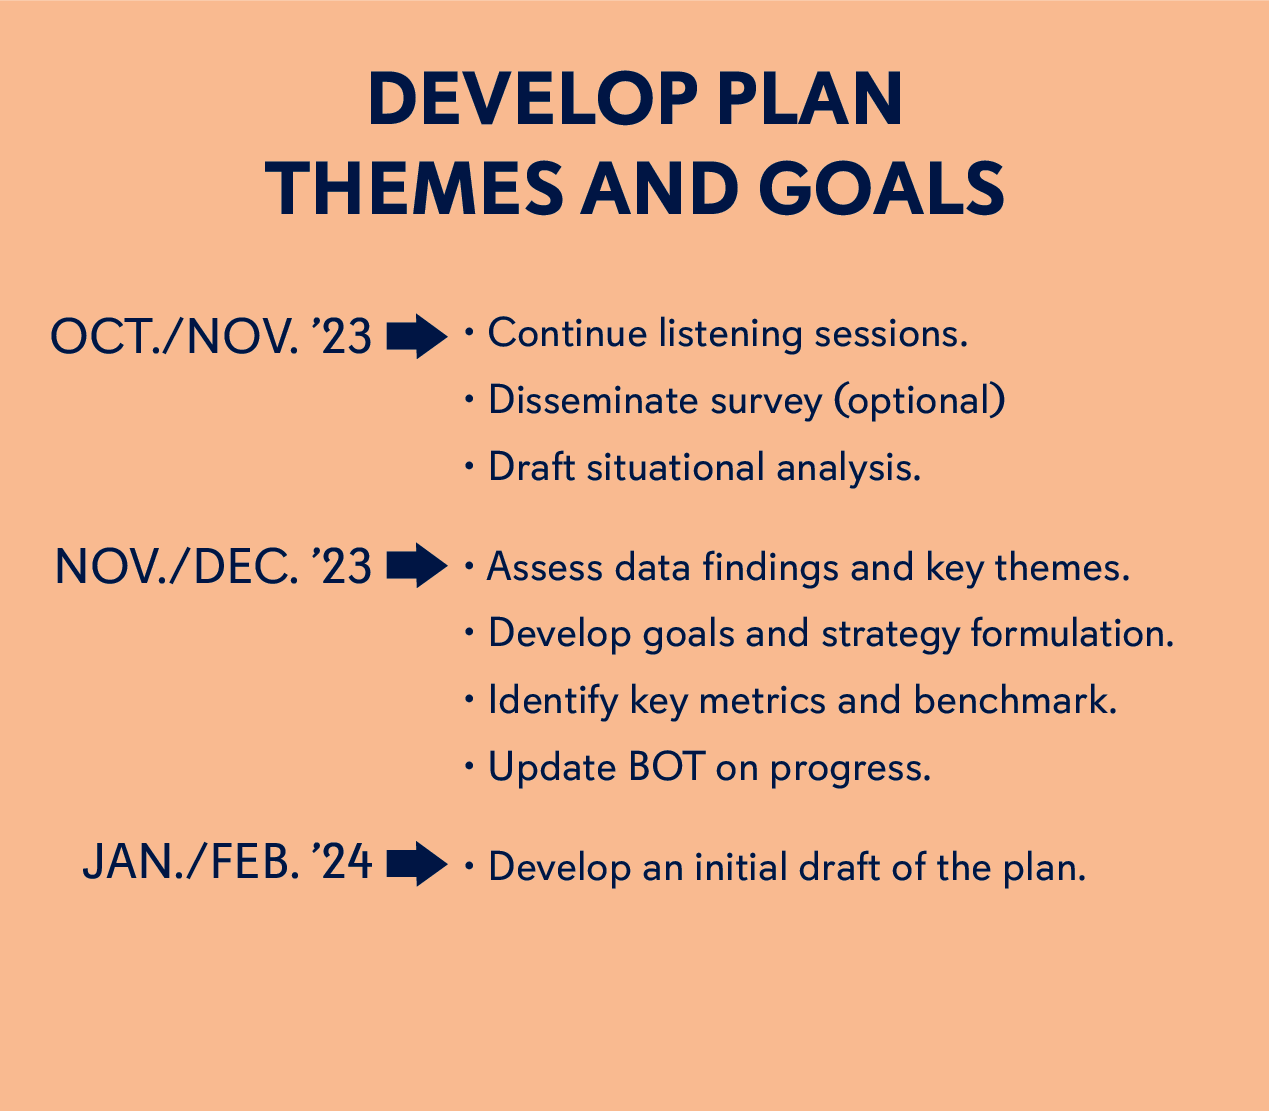 1. Oct-Nov - continue listening sessions, disseminate survey, draft situational analysis 2. Nov/Dec - Asess findings and themes, identify metrics and benchmark, Update BOT